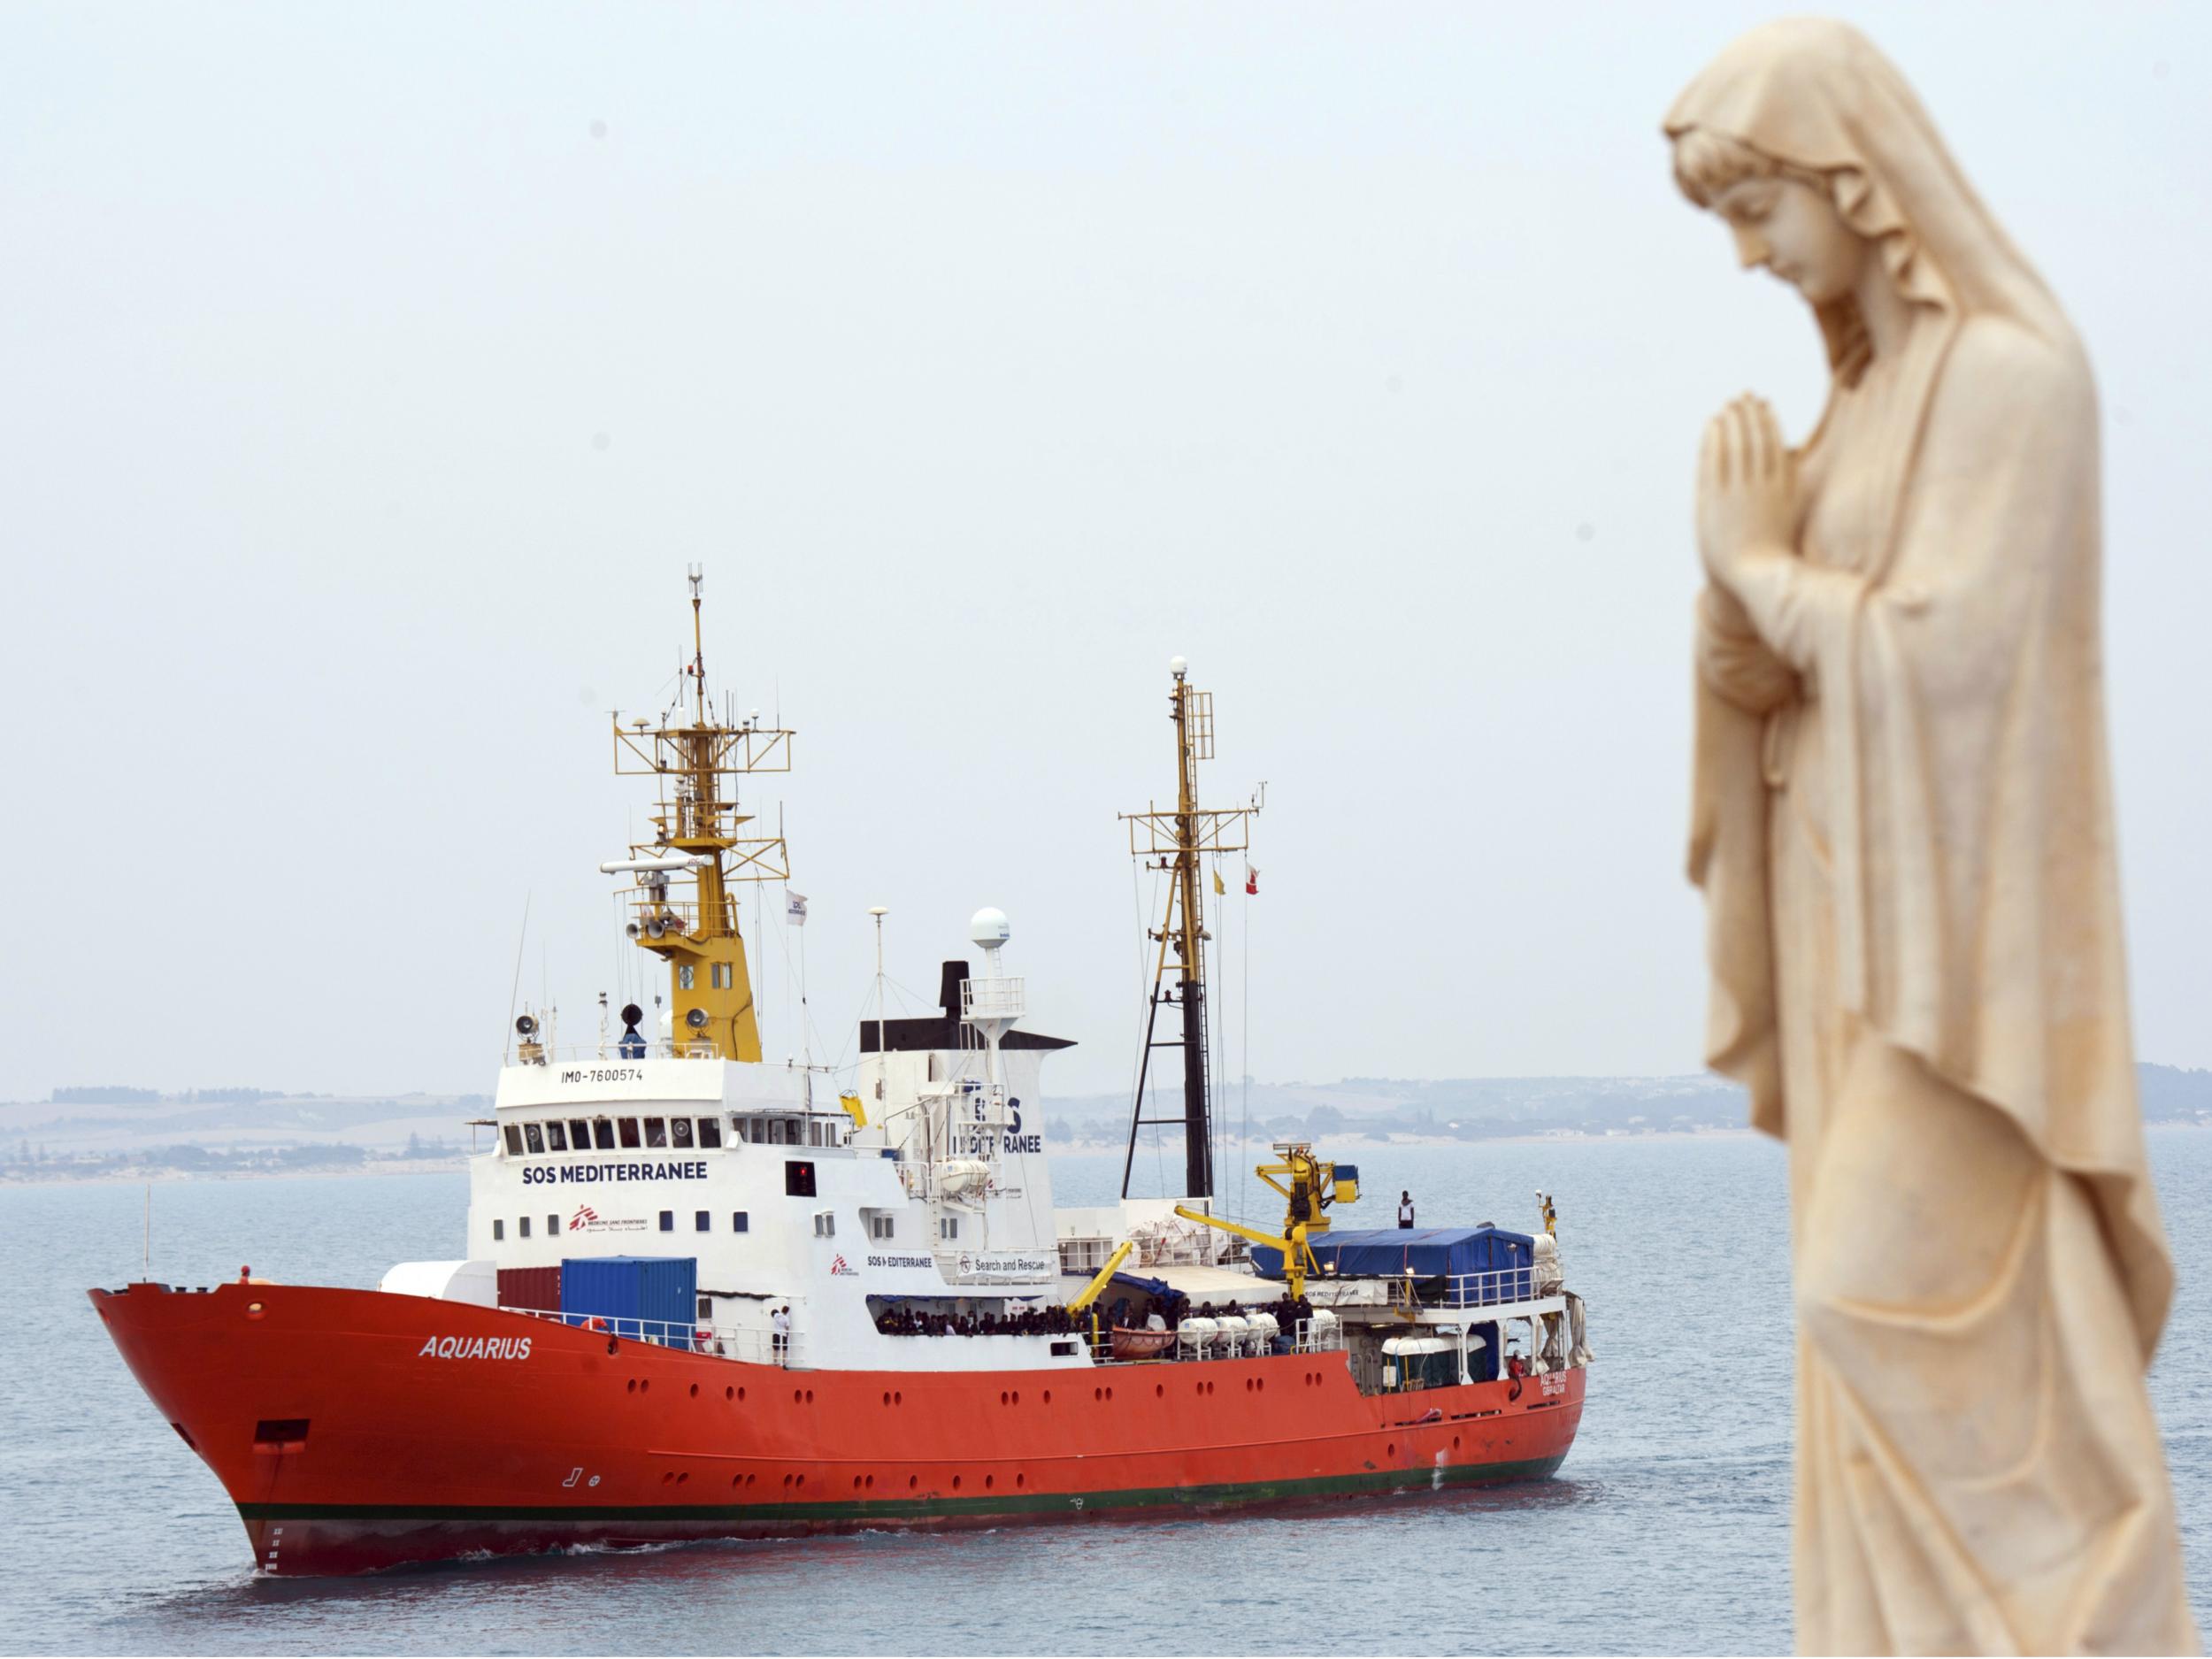 The Aquarius has been refused entry to Italian ports